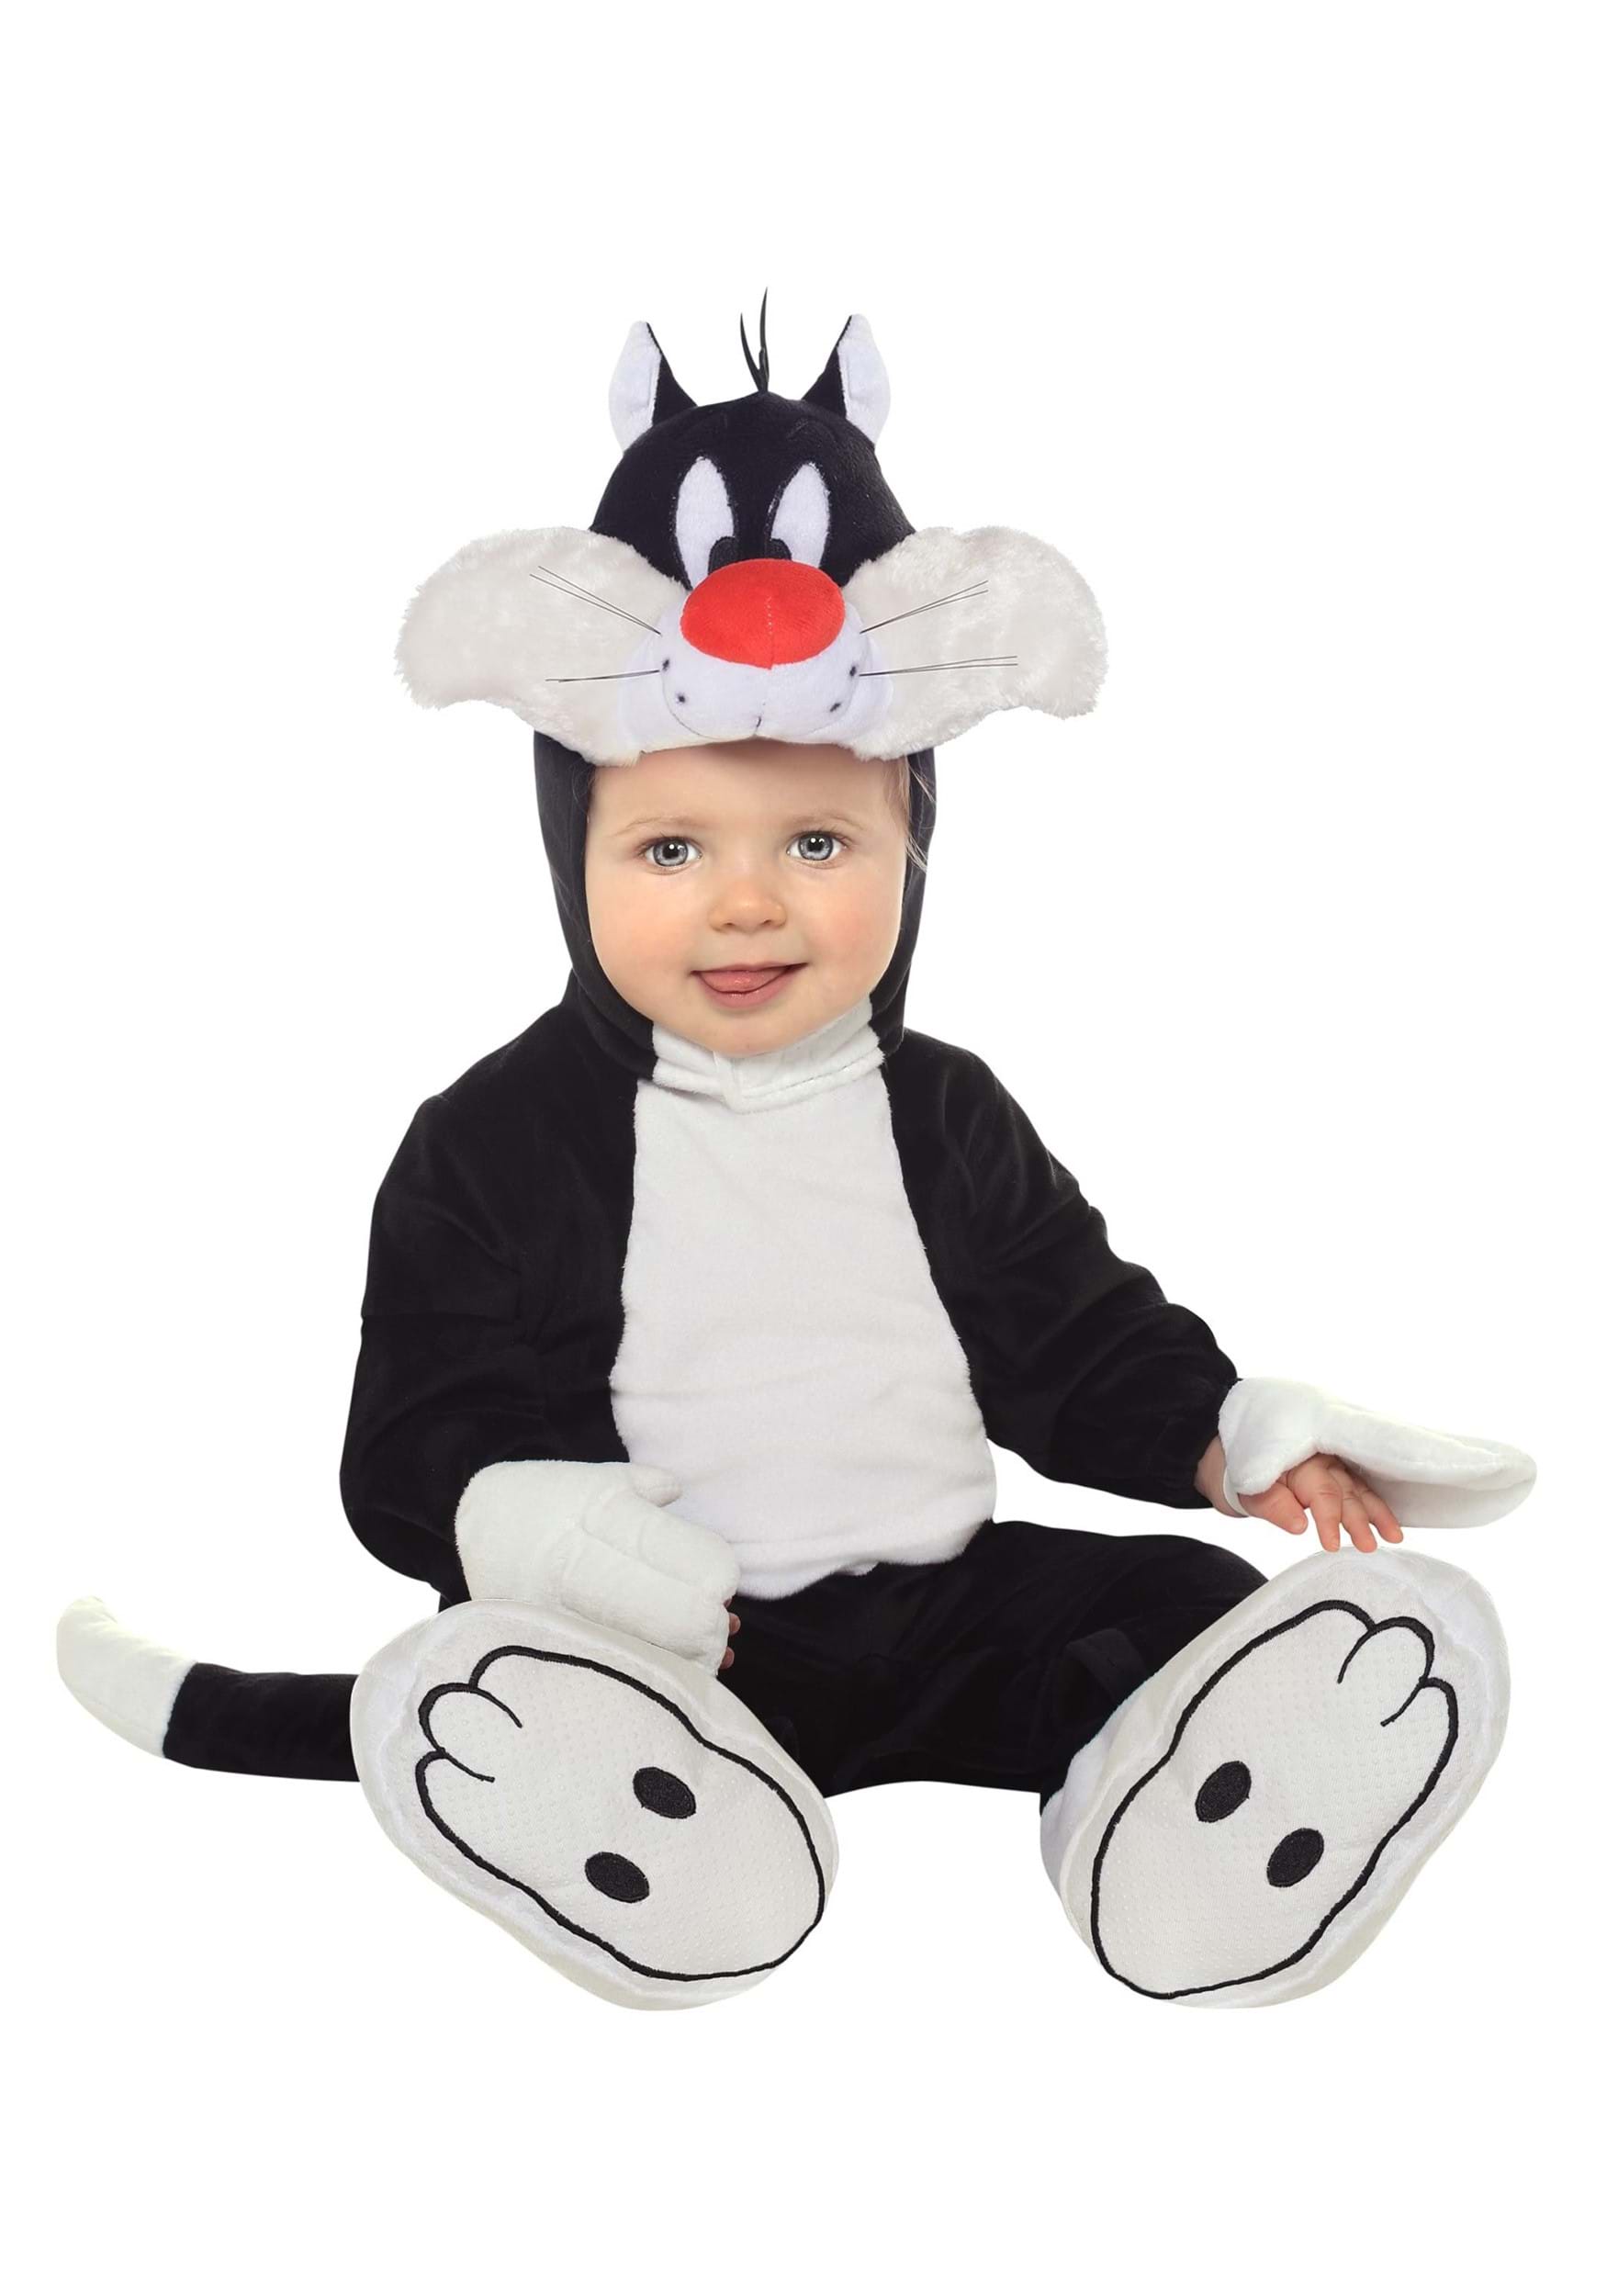 Photos - Fancy Dress Rubies Costume Co. Inc Sylvester Toddler Looney Tunes Costume Black/Re 